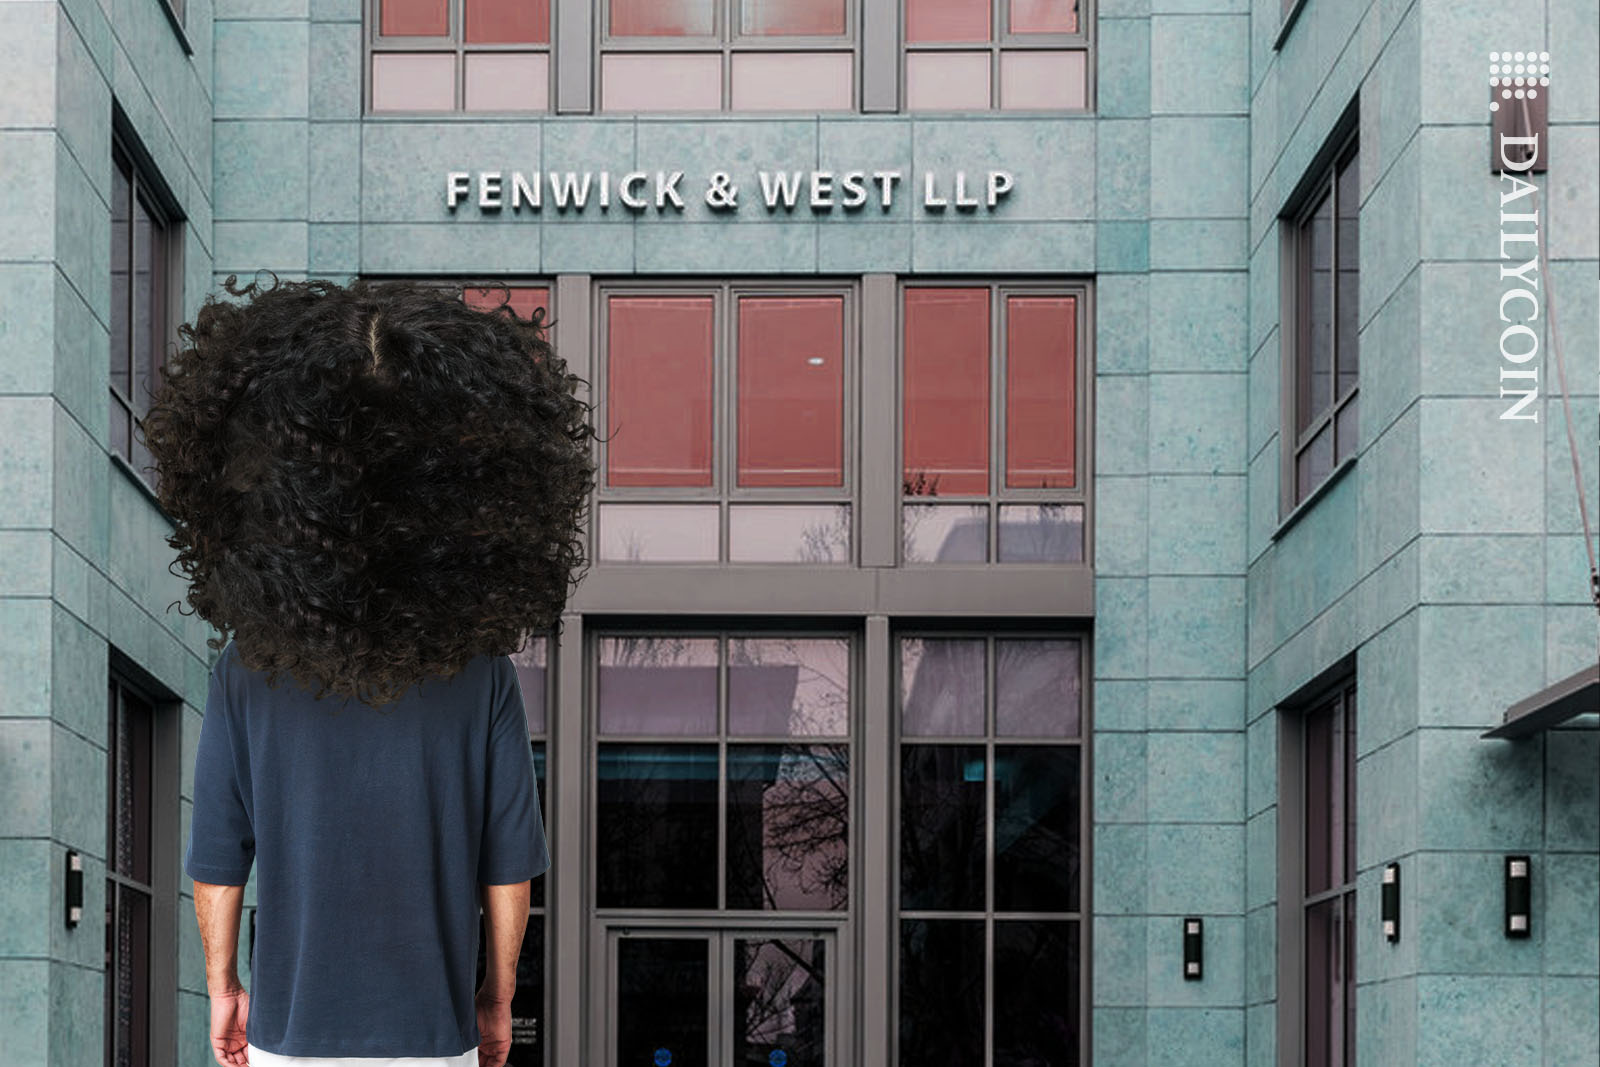 Sam Bankman Fried staring at the Fenwick & West building.